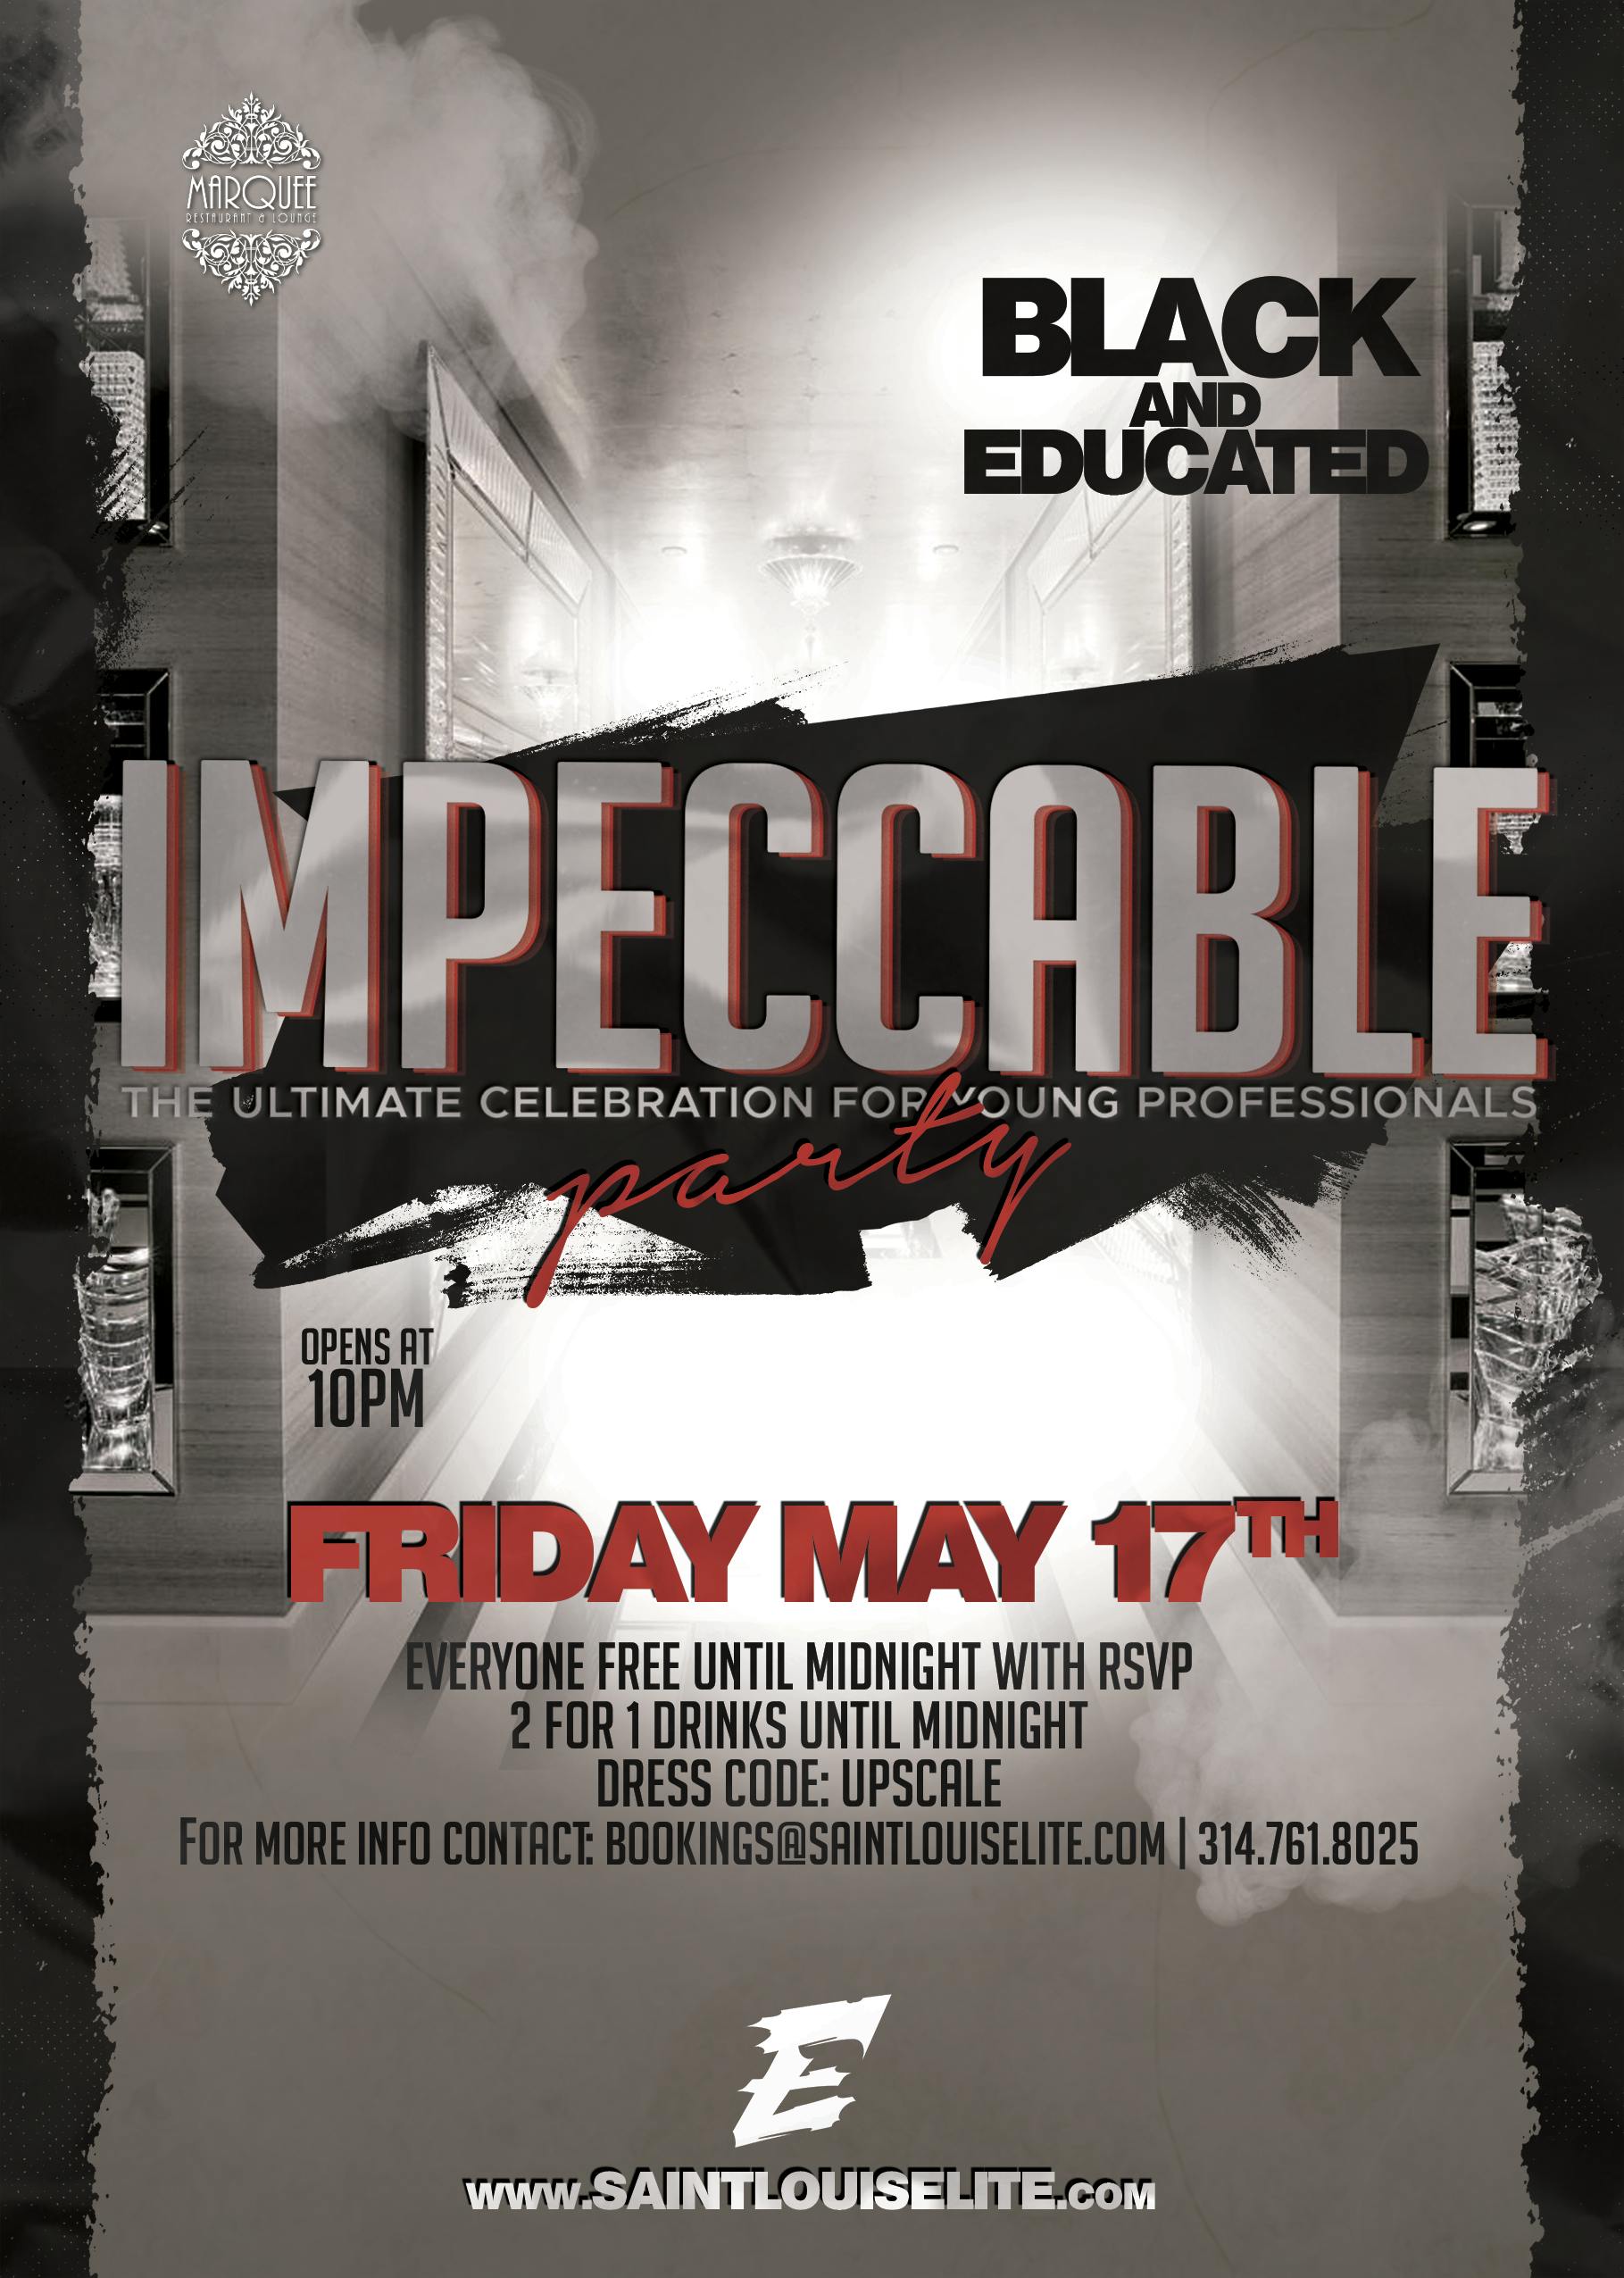 Impeccable Friday - The Ultimate Celebration for Young Professionals